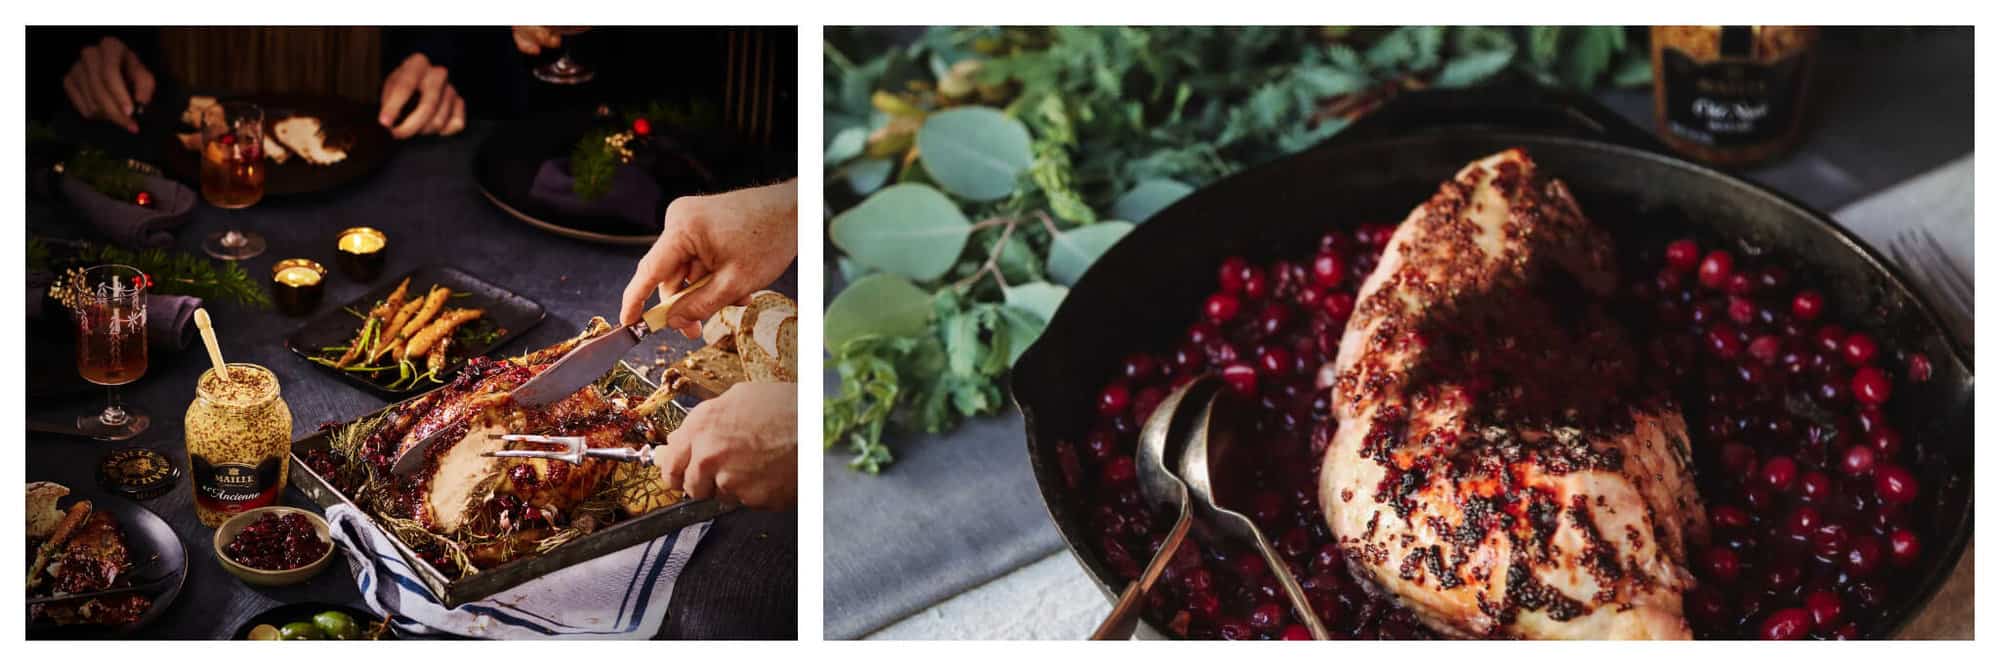 Left: a table set with a turkey, carrots, cranberry sauce, and other Thanksgiving foods. There is a glass jar of mustard visible. Someone is cutting the turkey. Right: a cast iron pan filled with cranberries and turkey. There is greenery and a glass jar of mustard visible in the background.